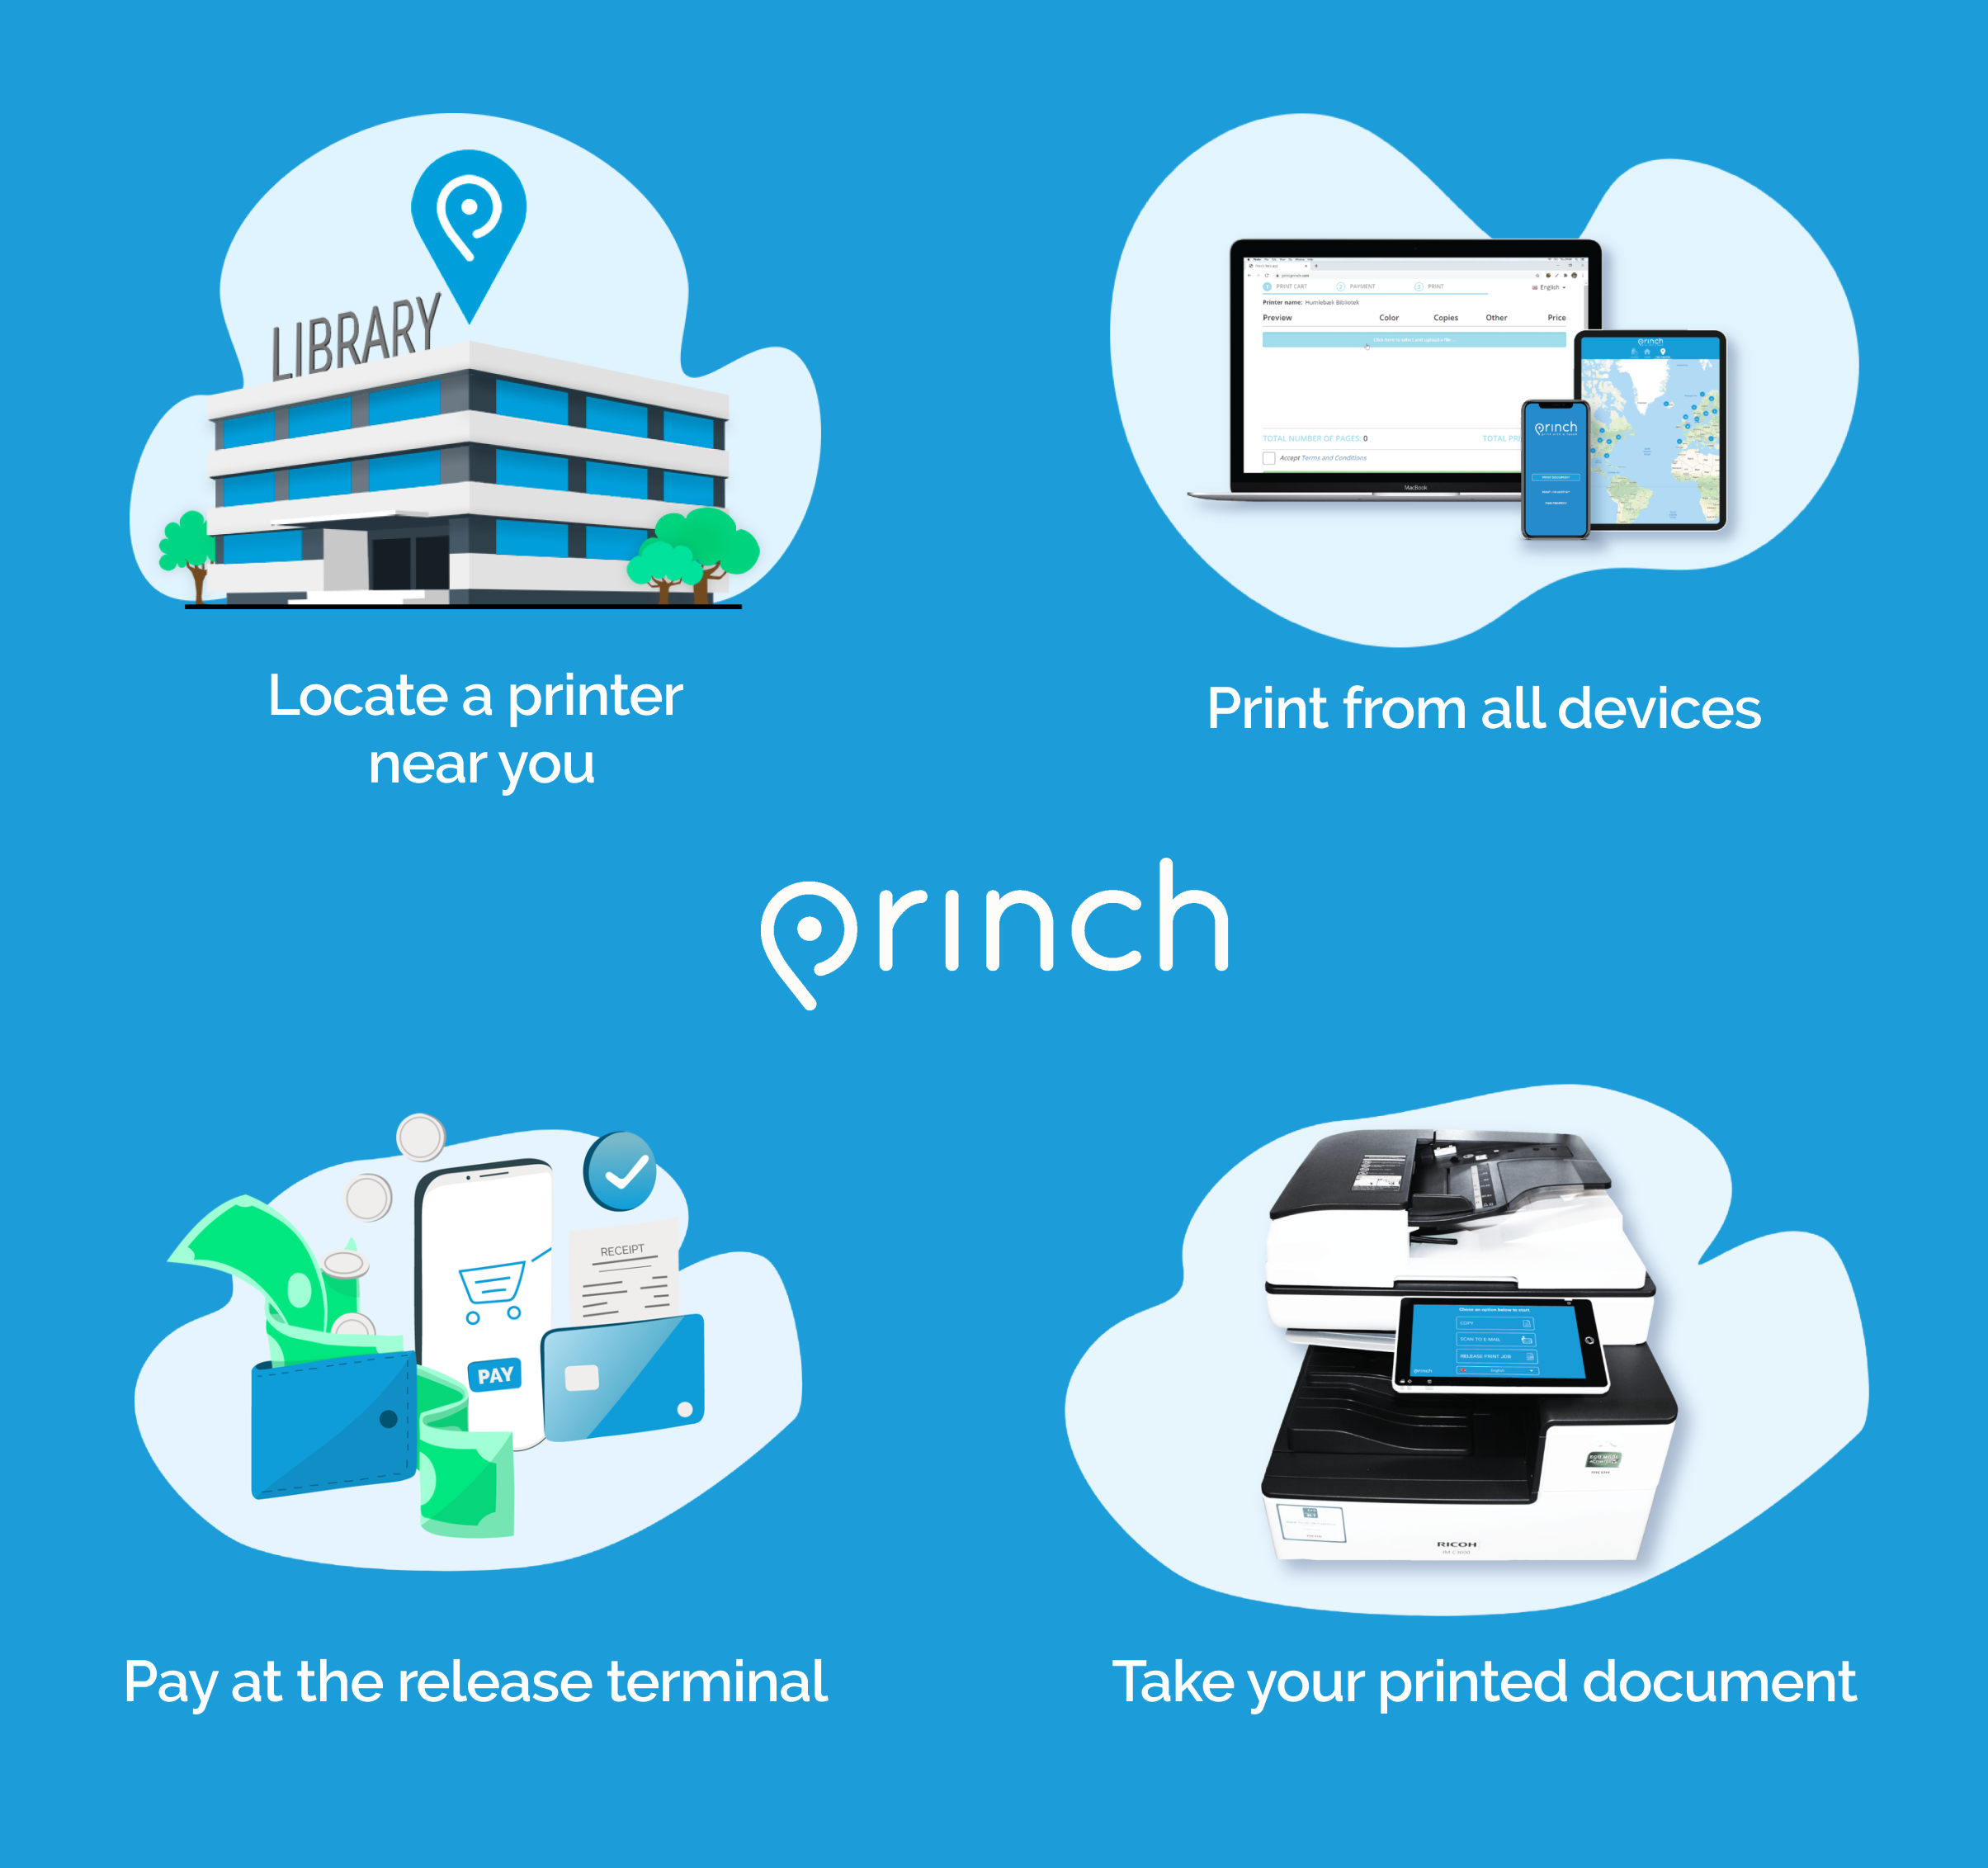 Instructions to locate a library, print from devices, pay at the release terminal, and get your printout.